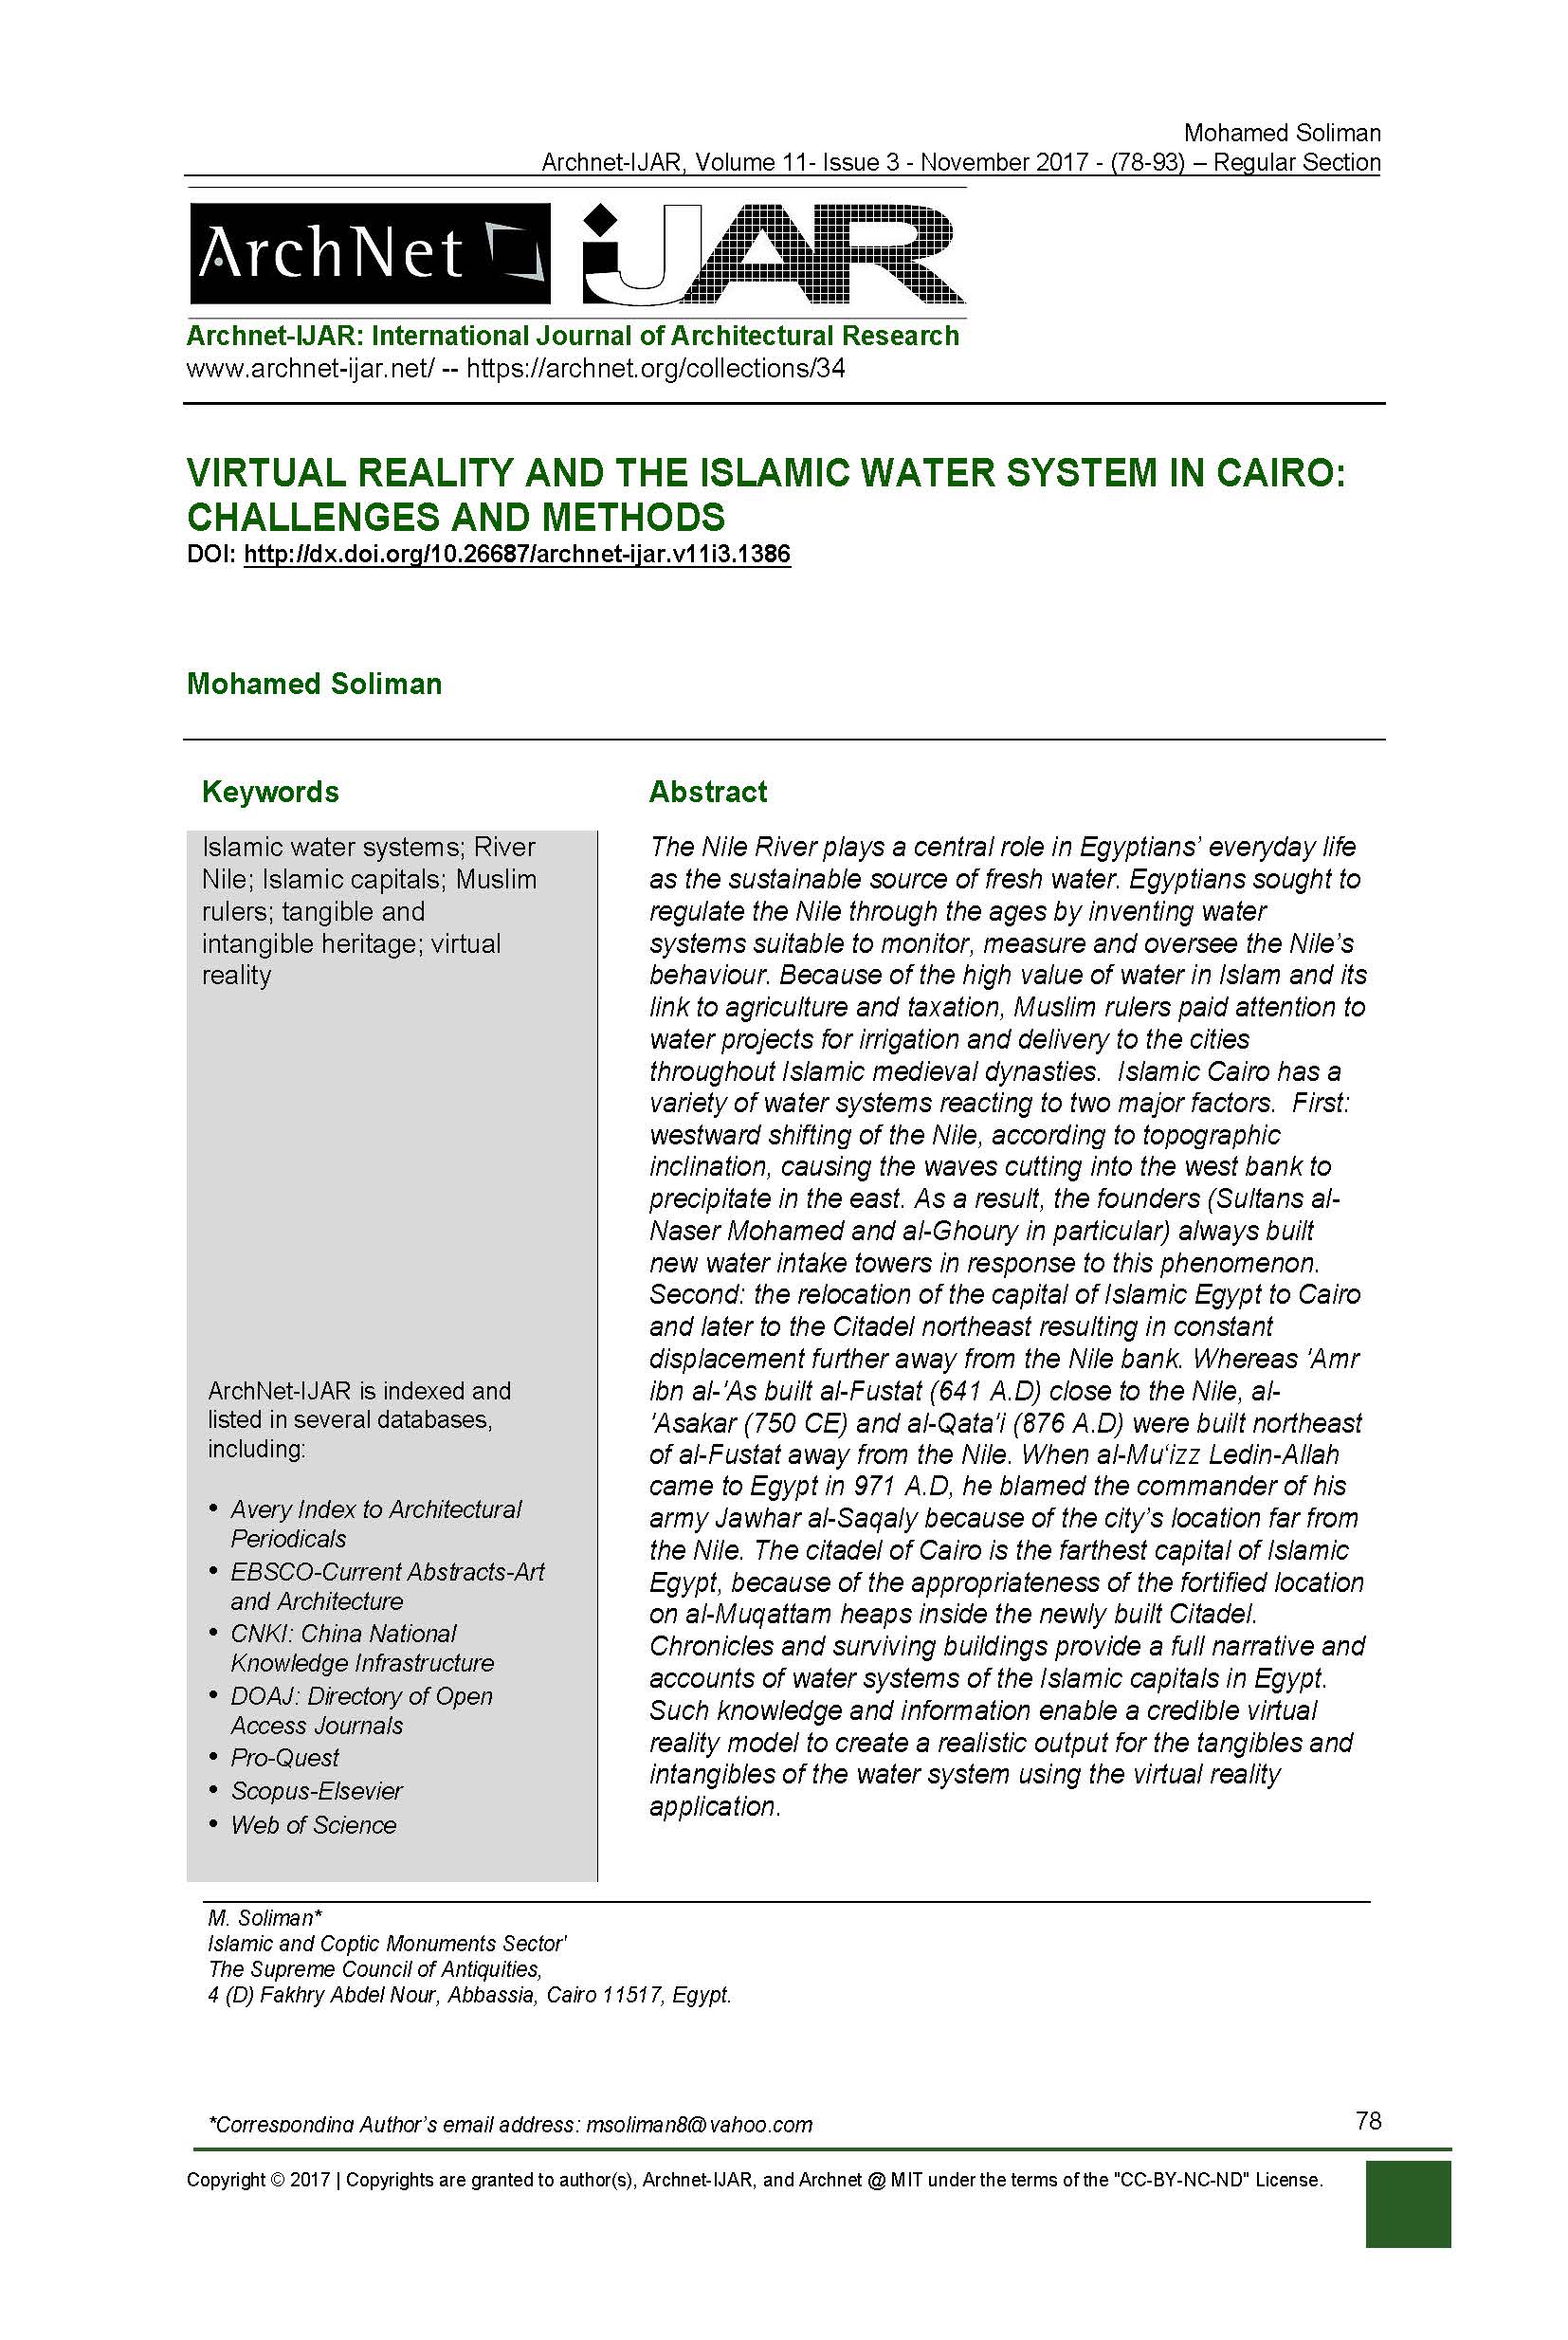 Virtual Reality and the Islamic Water System in Cairo: Challenges and Methods